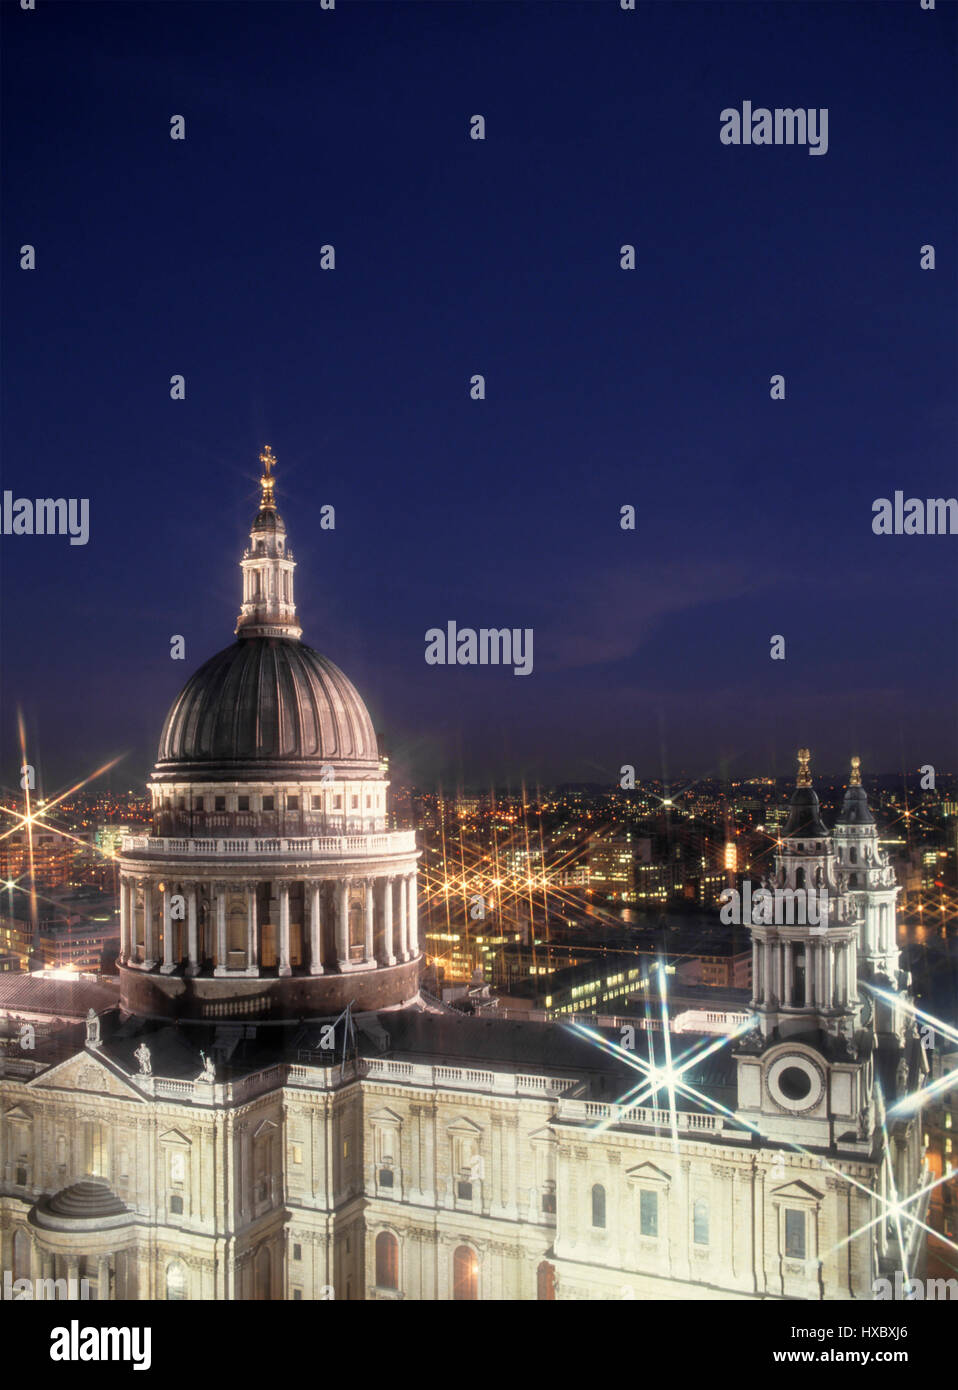 St pauls cathedral church religion Church of England Christopher Wren cathedral dome at dusk aerial view from above looking down on City of London UK Stock Photo